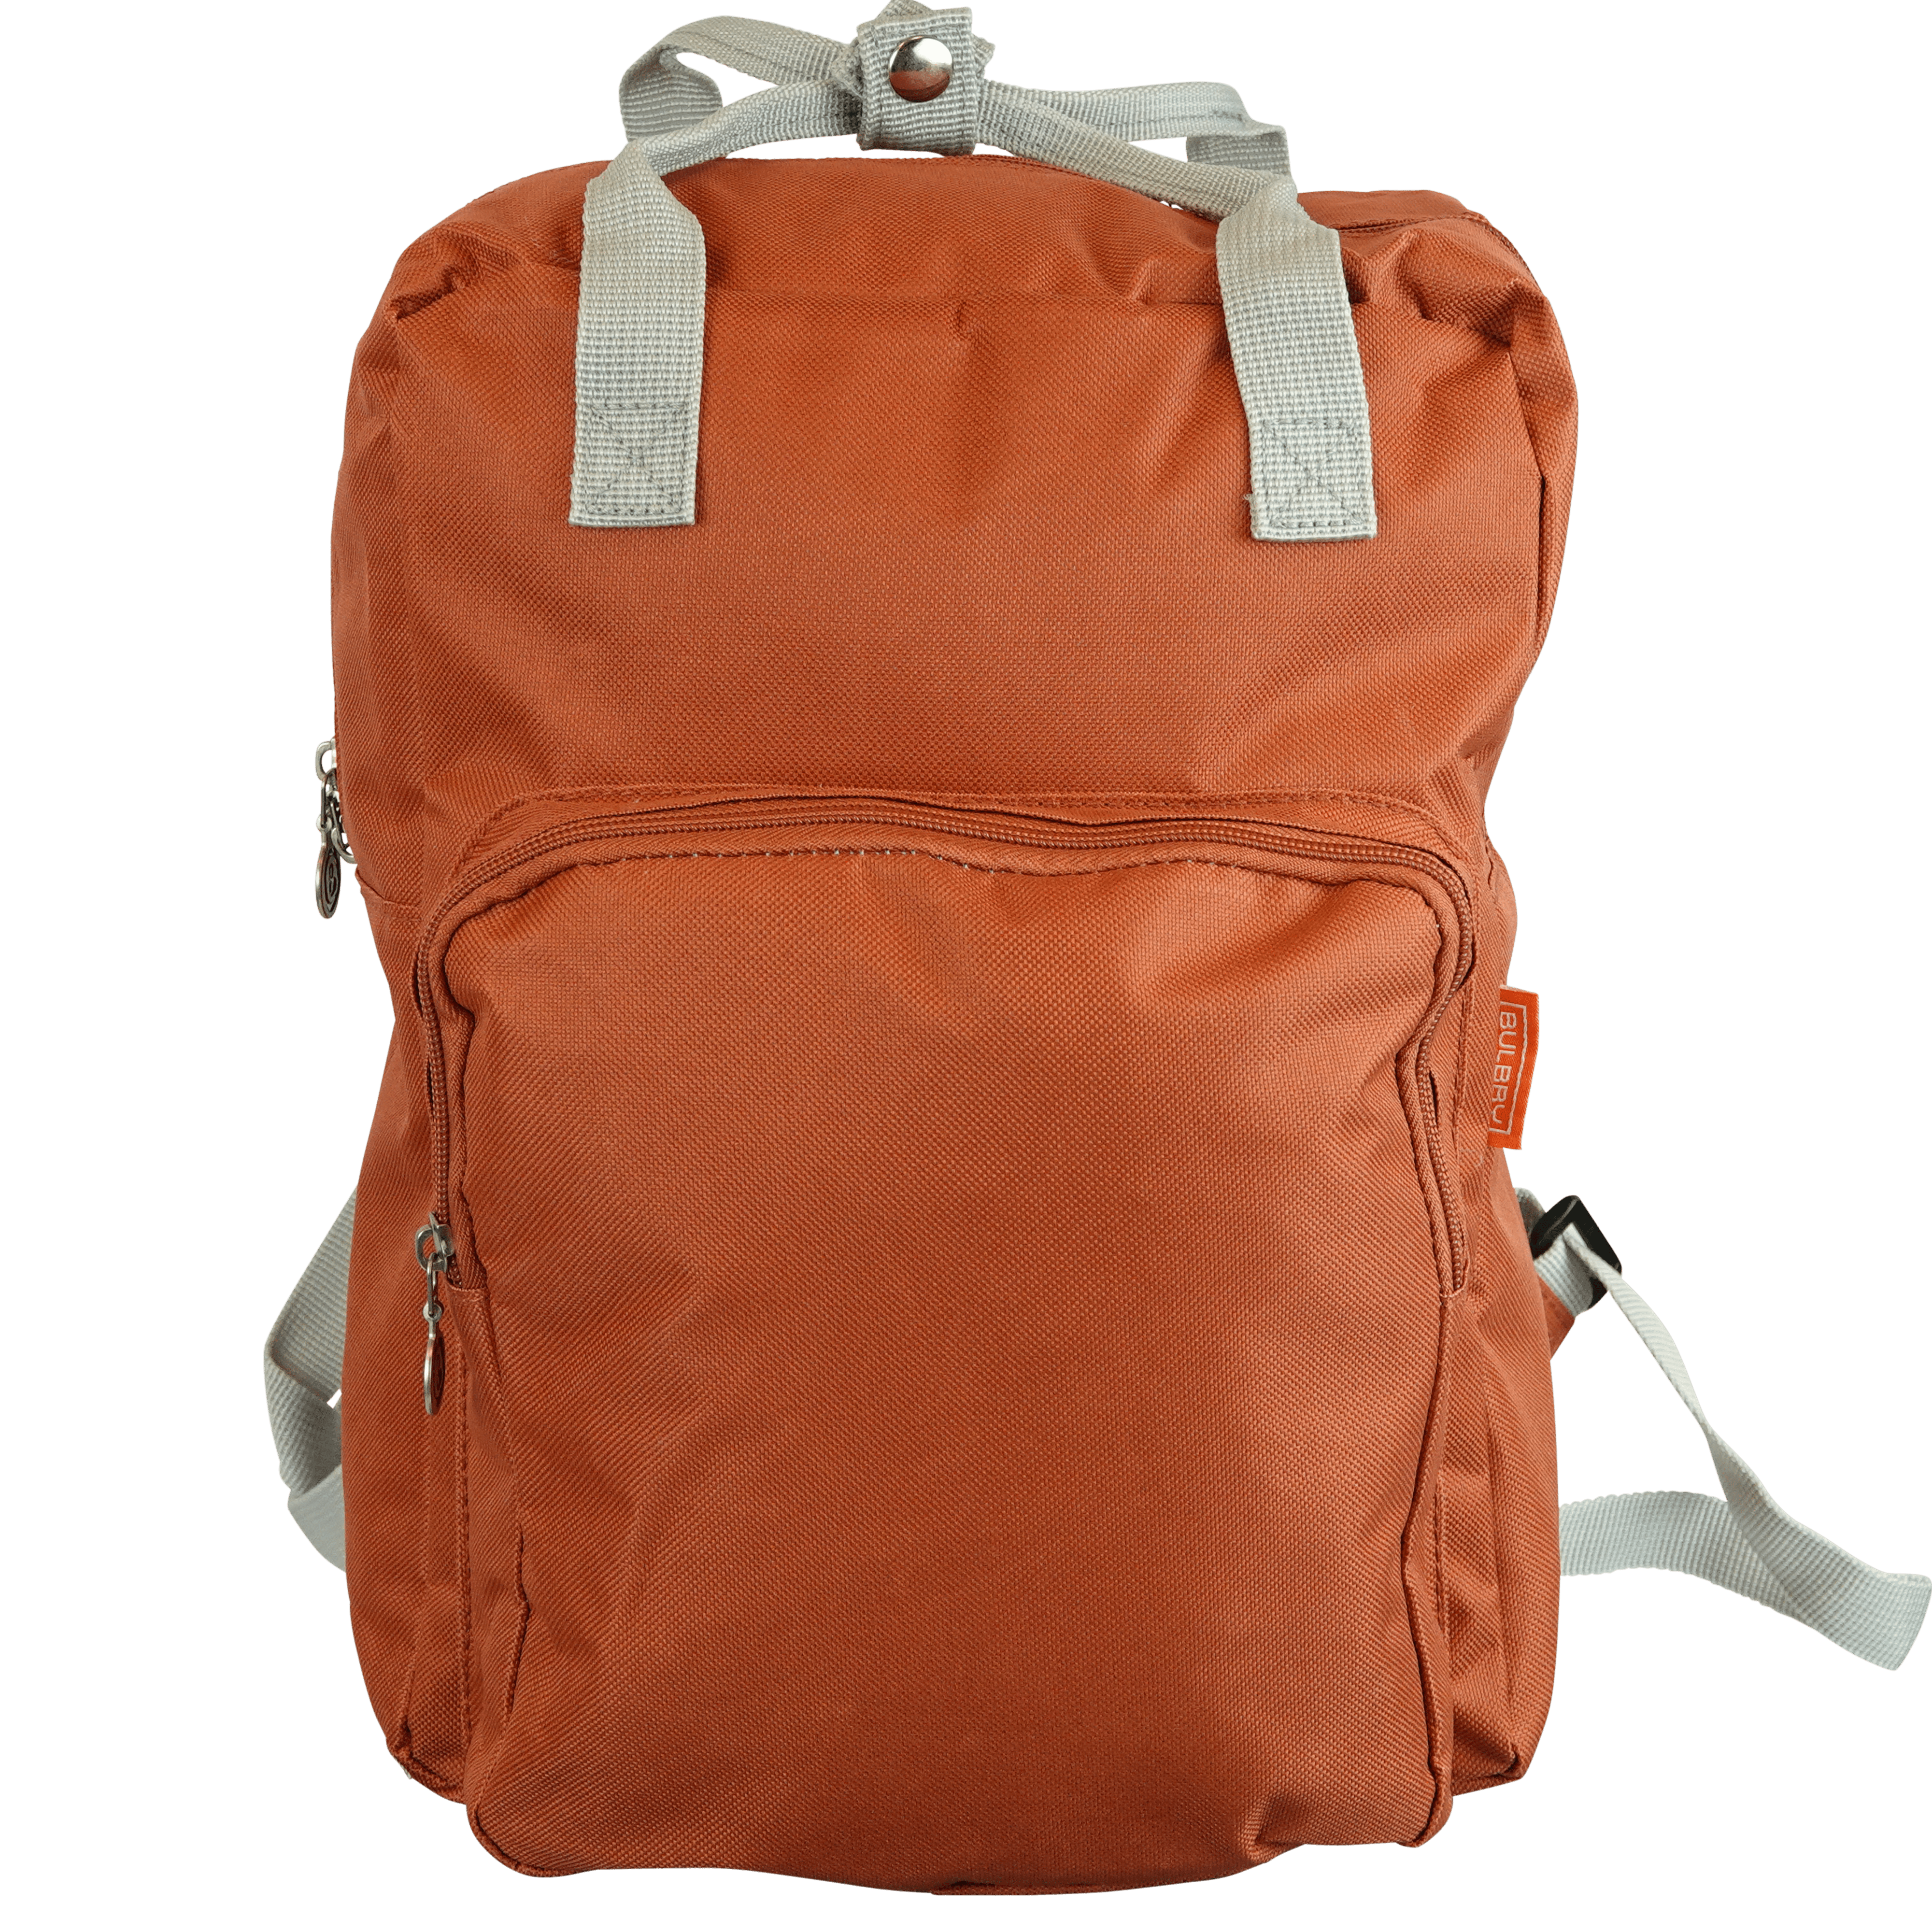 Backpack classic large rusty brown